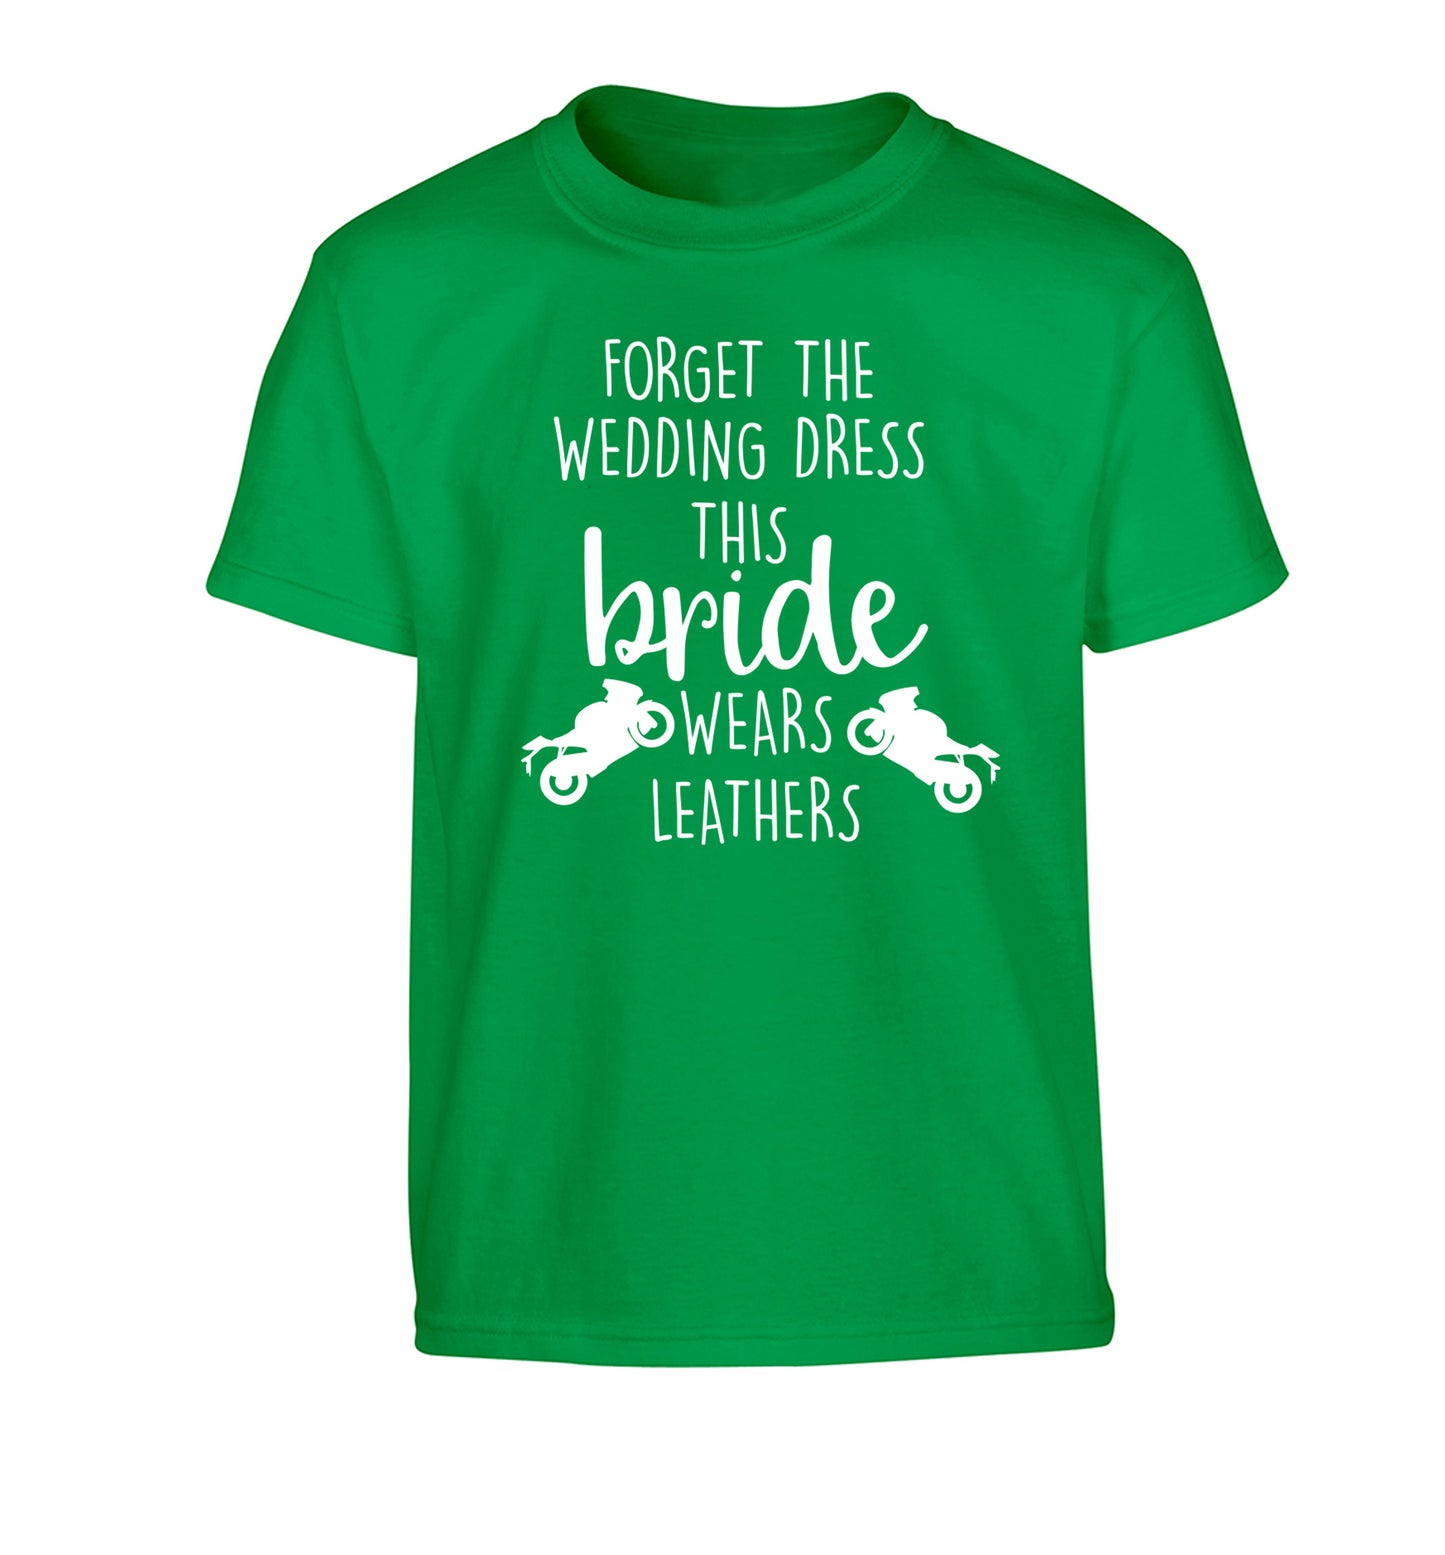 Forget the wedding dress this bride wears leathers Children's green Tshirt 12-13 Years